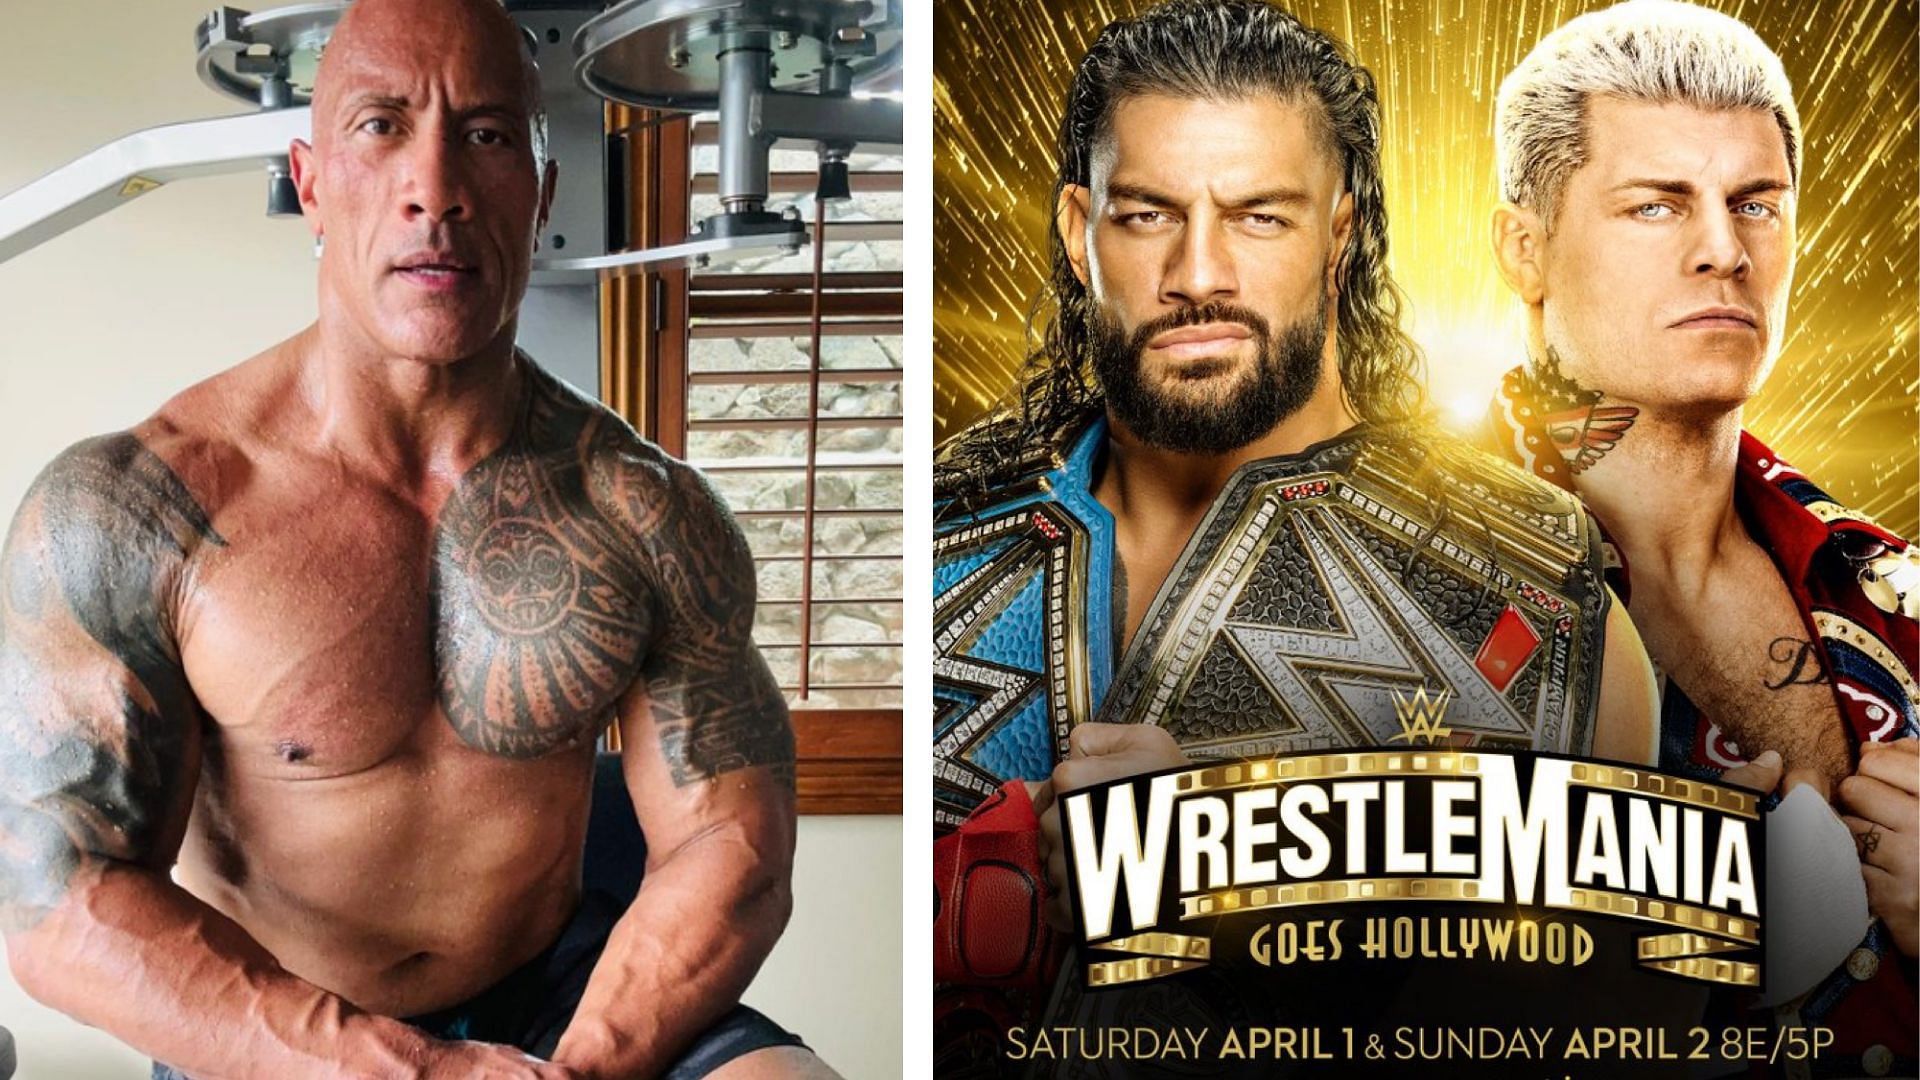 The Rock could play a huge role in the main event of WWE WrestleMania 39